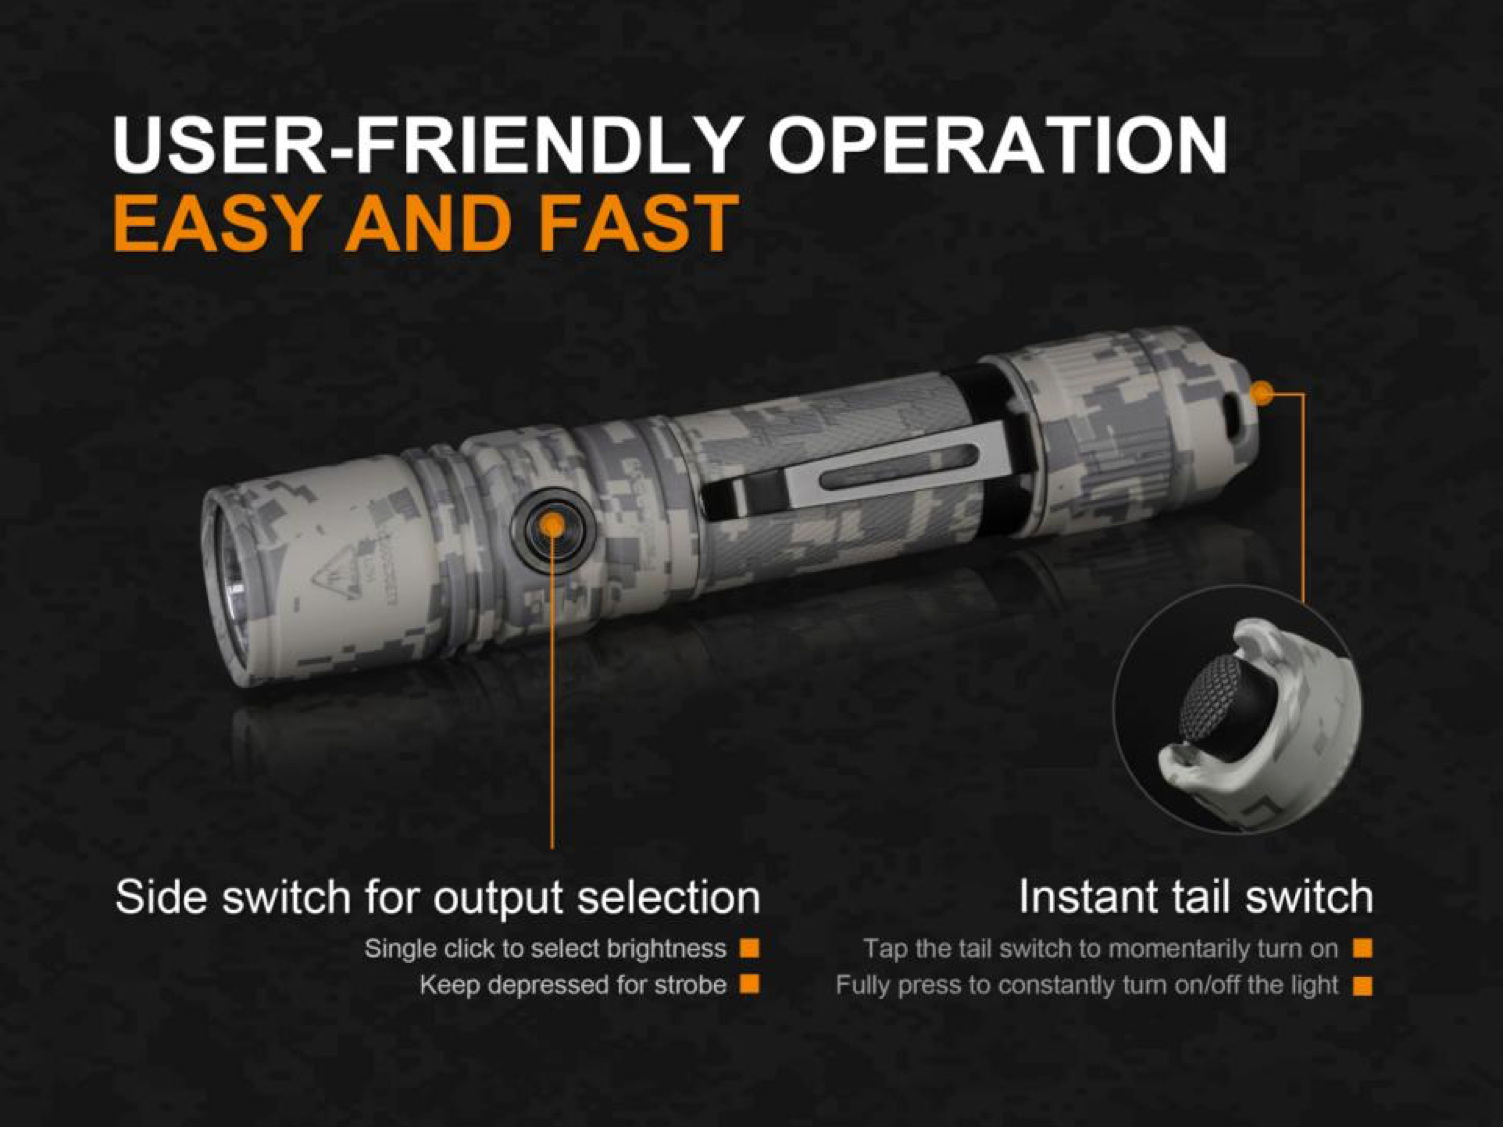 Fenix PD35, Fenix PD35 V2.0 Camo Edition, 1000 Lumens Tactical LED Flashlight, Compact Powerful Torch for Work Outdoor and Law Enforcement Use